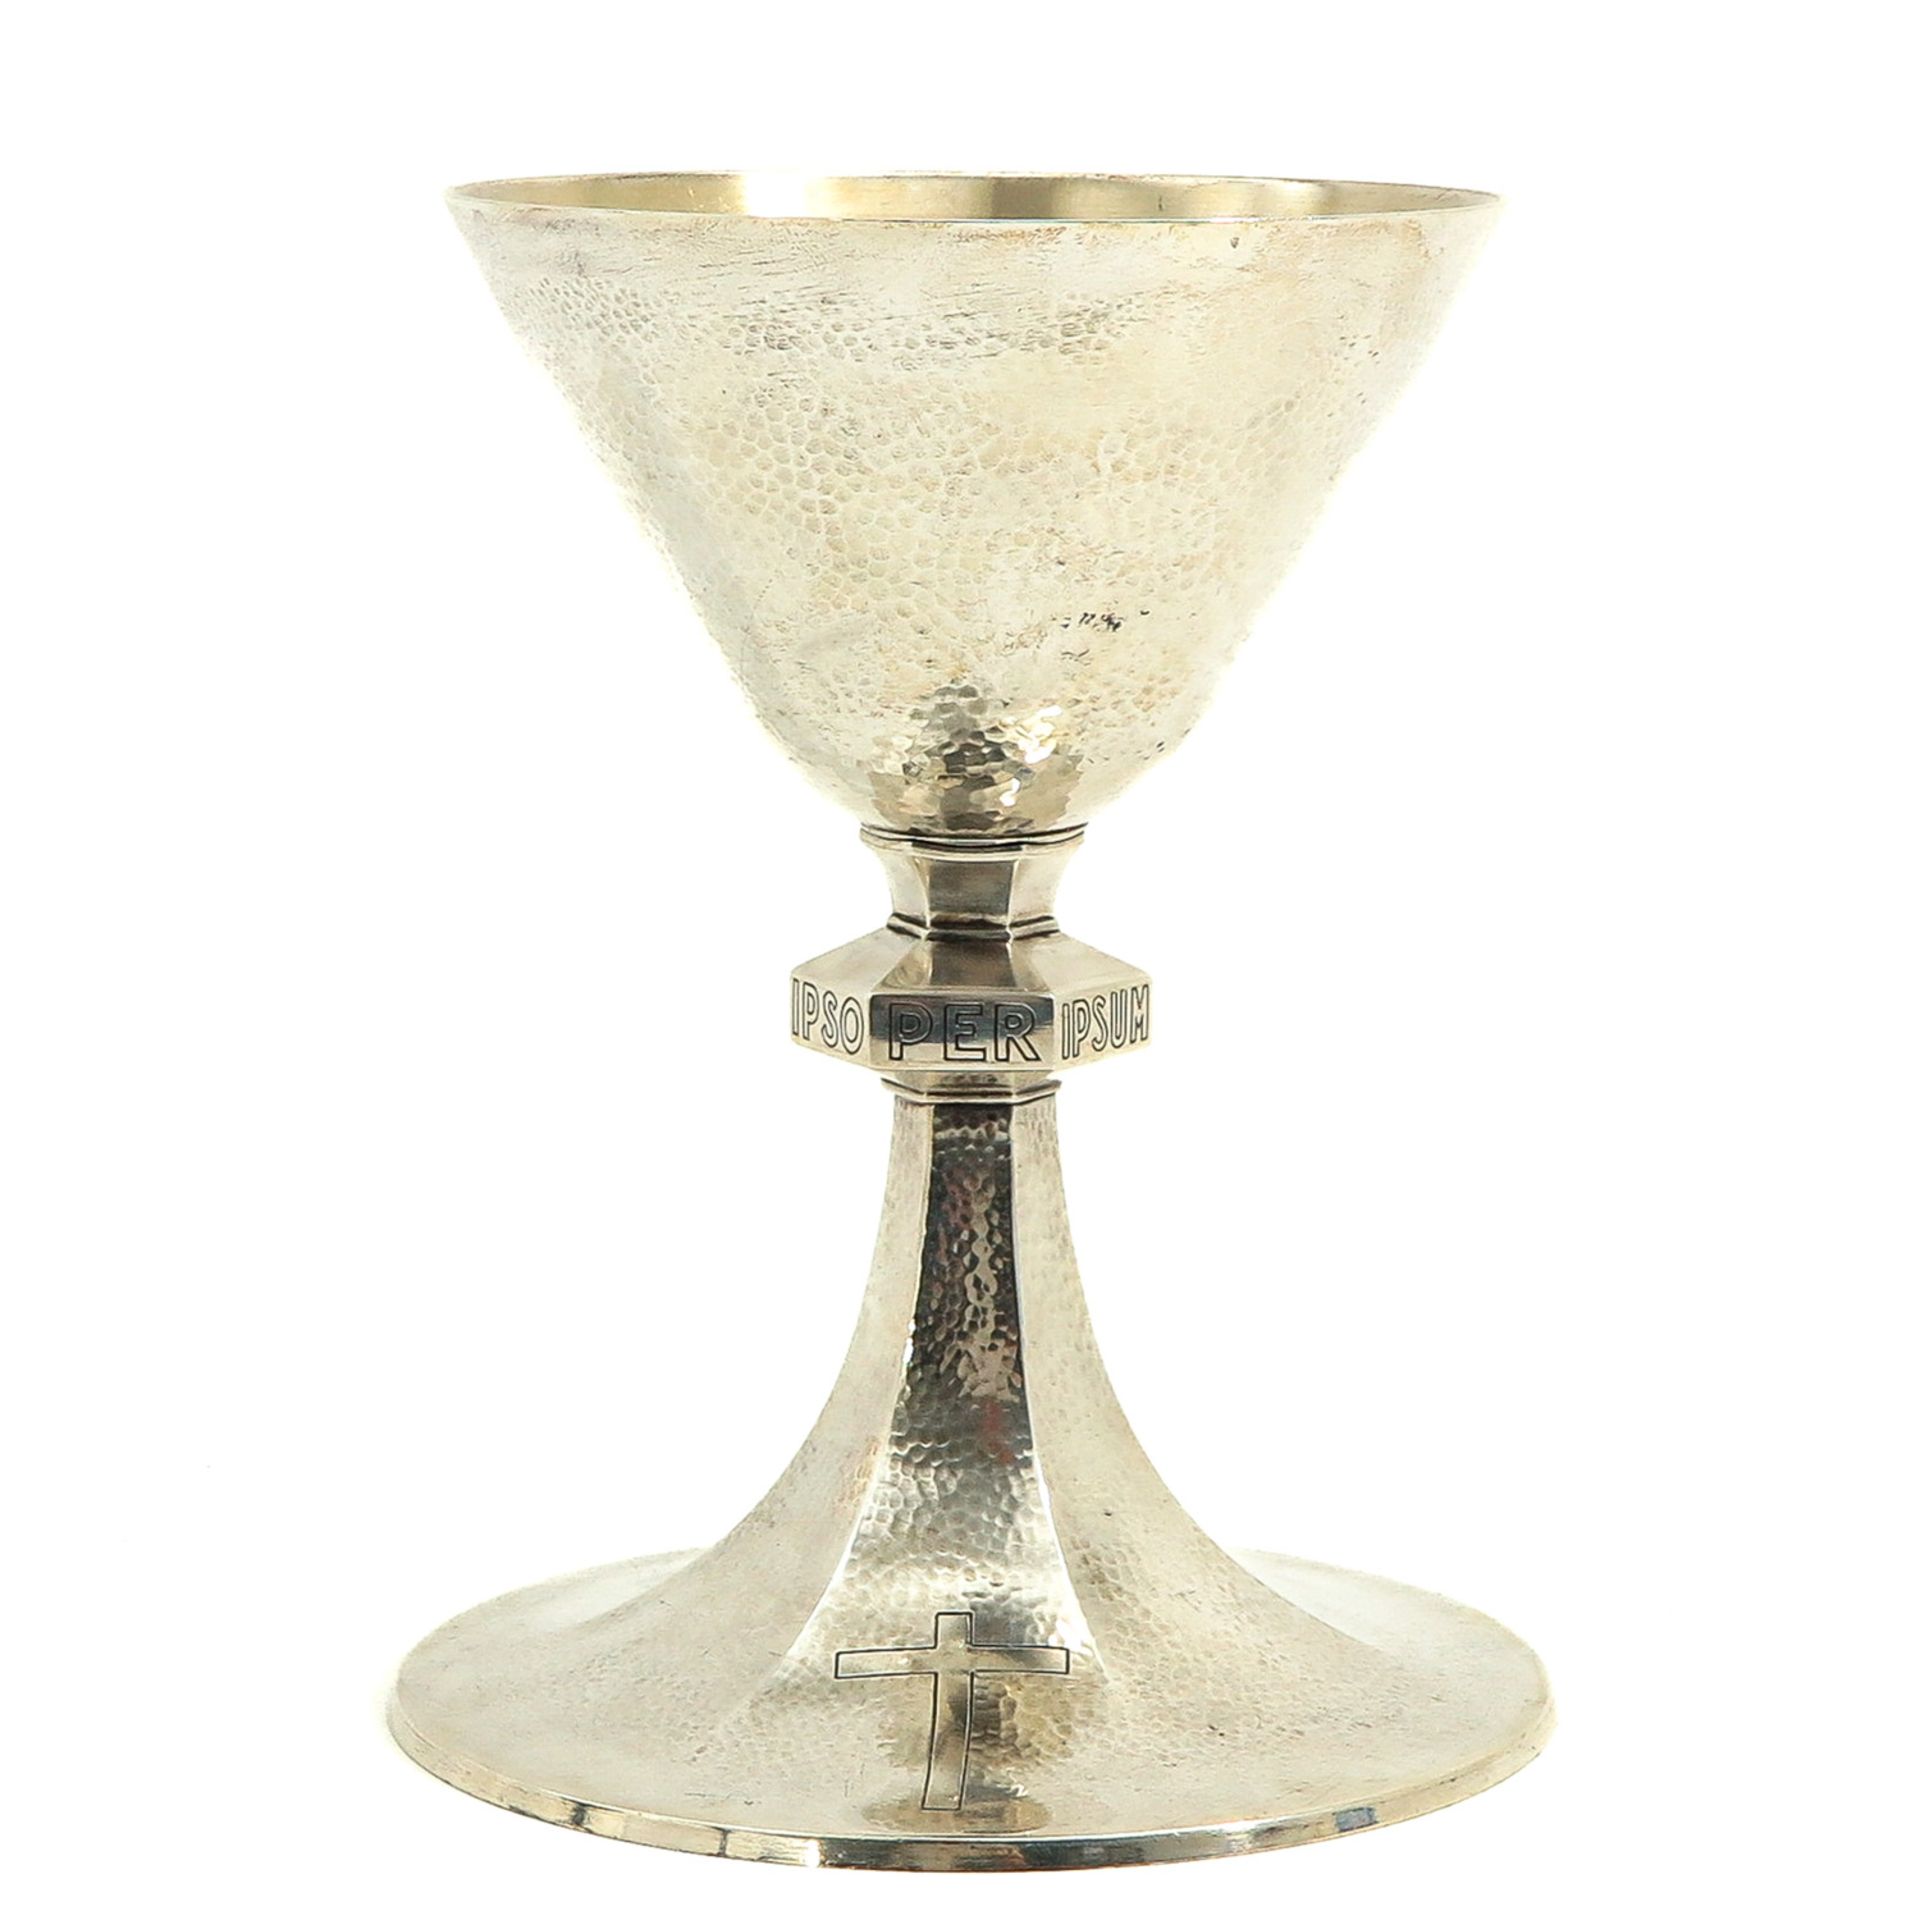 A Silver Chalice